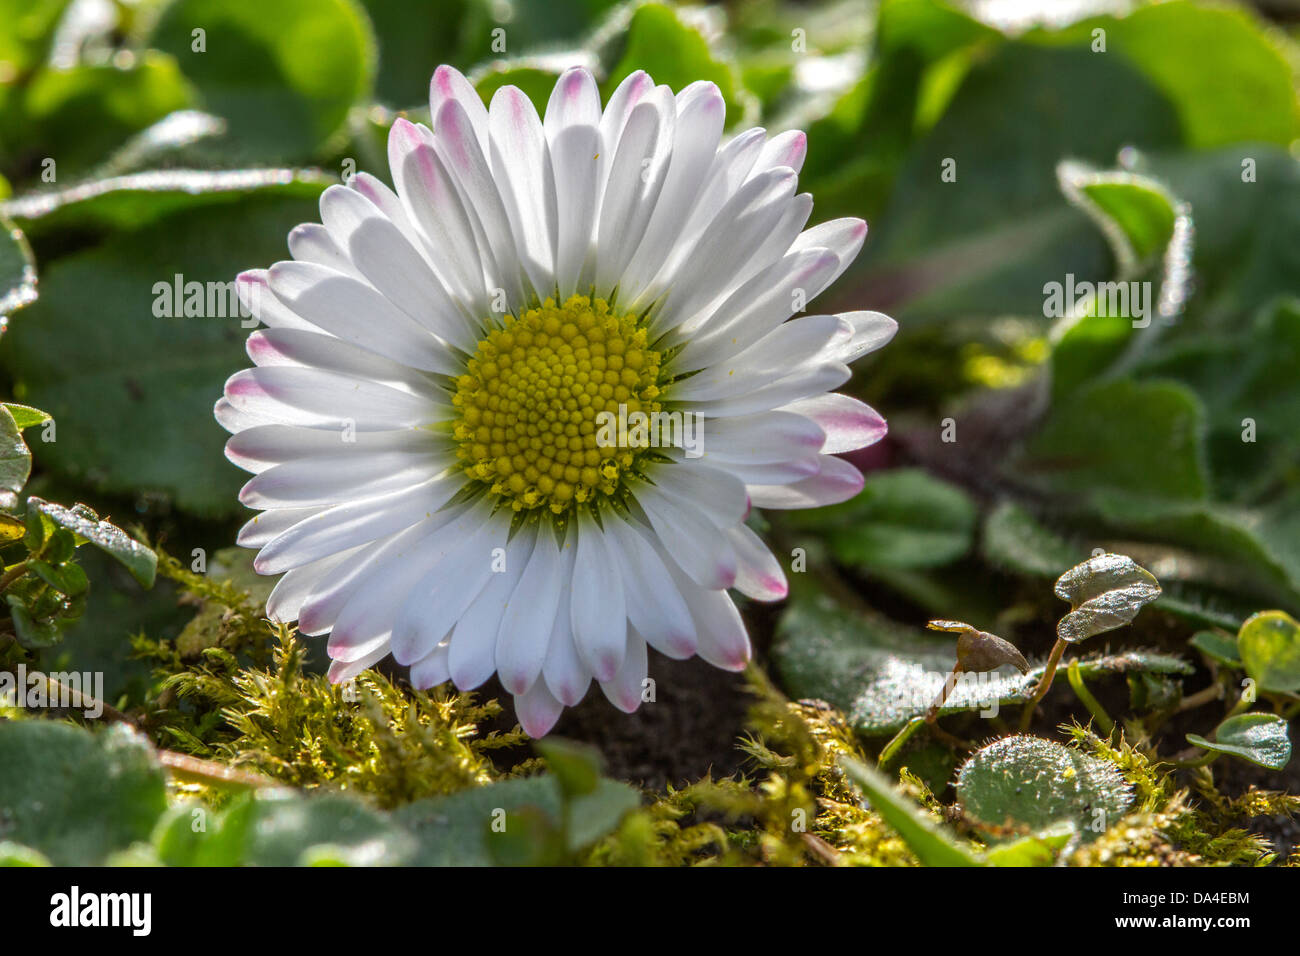 Common daisy / lawn daisy / English daisy (Bellis perennis) in flower in spring Stock Photo